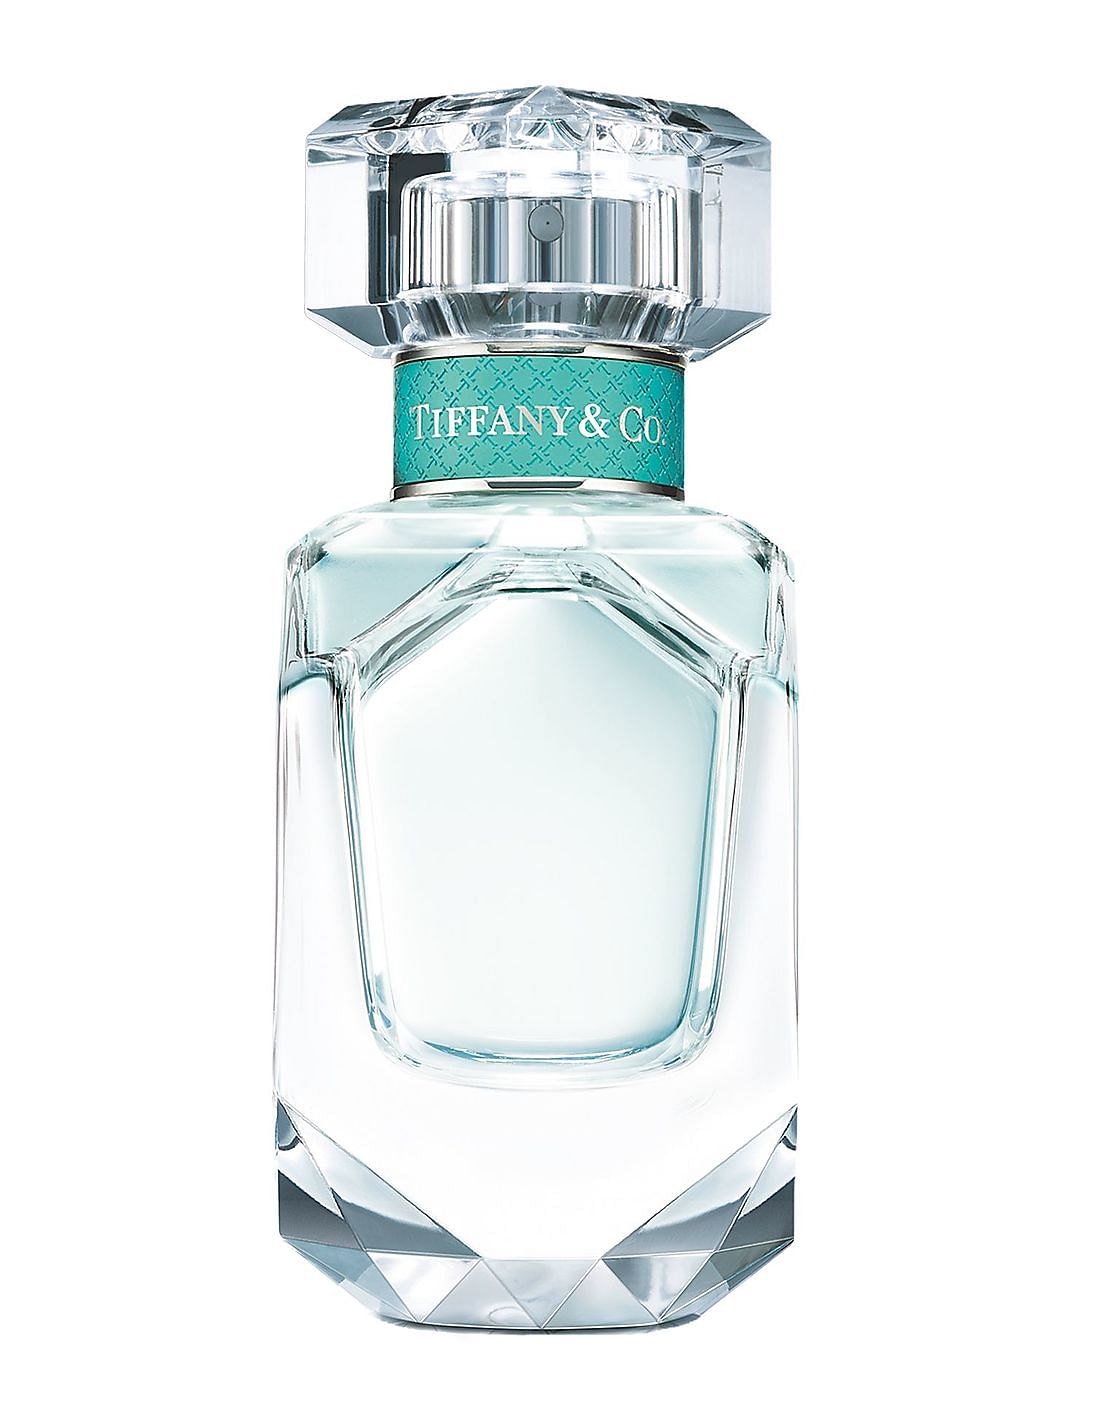 NNNOW.com Sale - Tiffany Co - Shop Online at Lowest Price in India